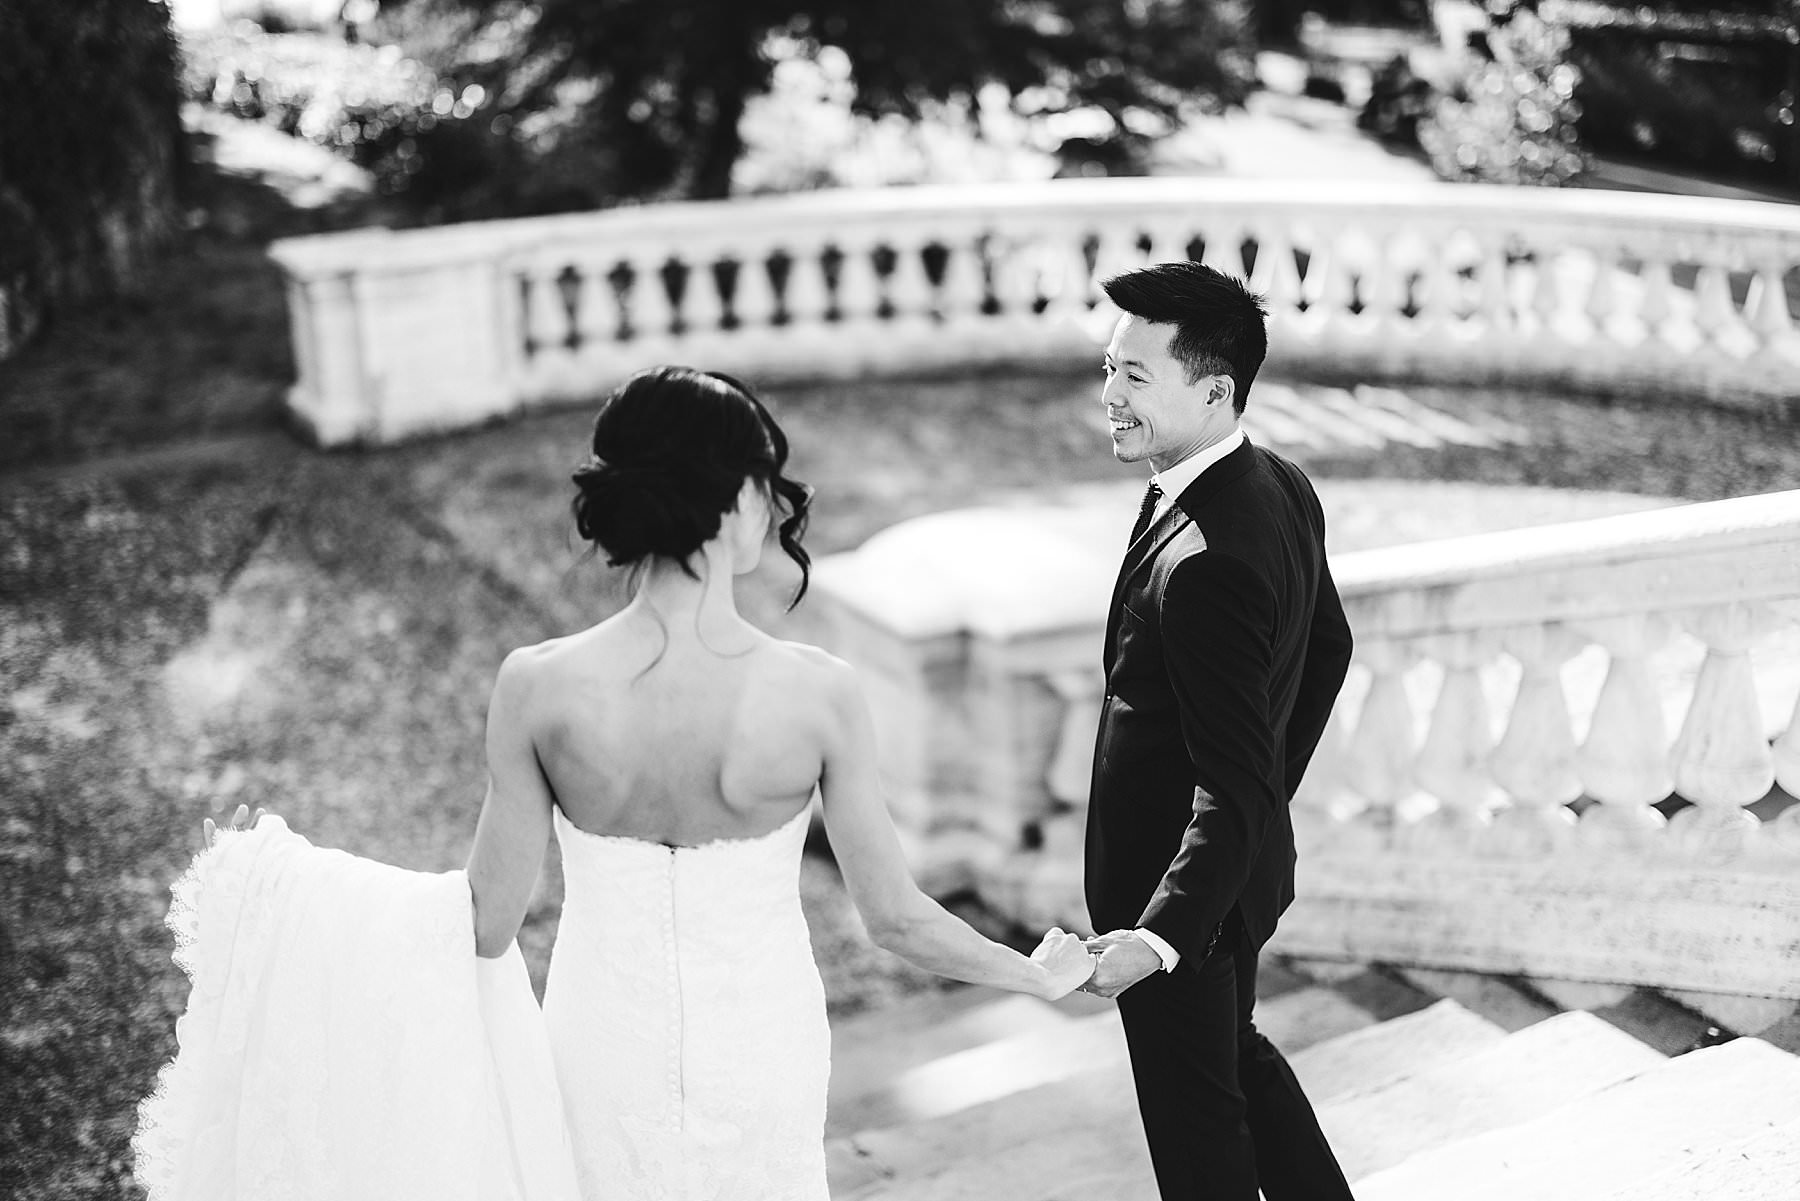 Honeymoon images to cherish forever. Through Jenny and Quan’s honeymoon images you can see all of their innate elegance, enhanced by the wedding gown and suit, and the power of the feeling that bonds them